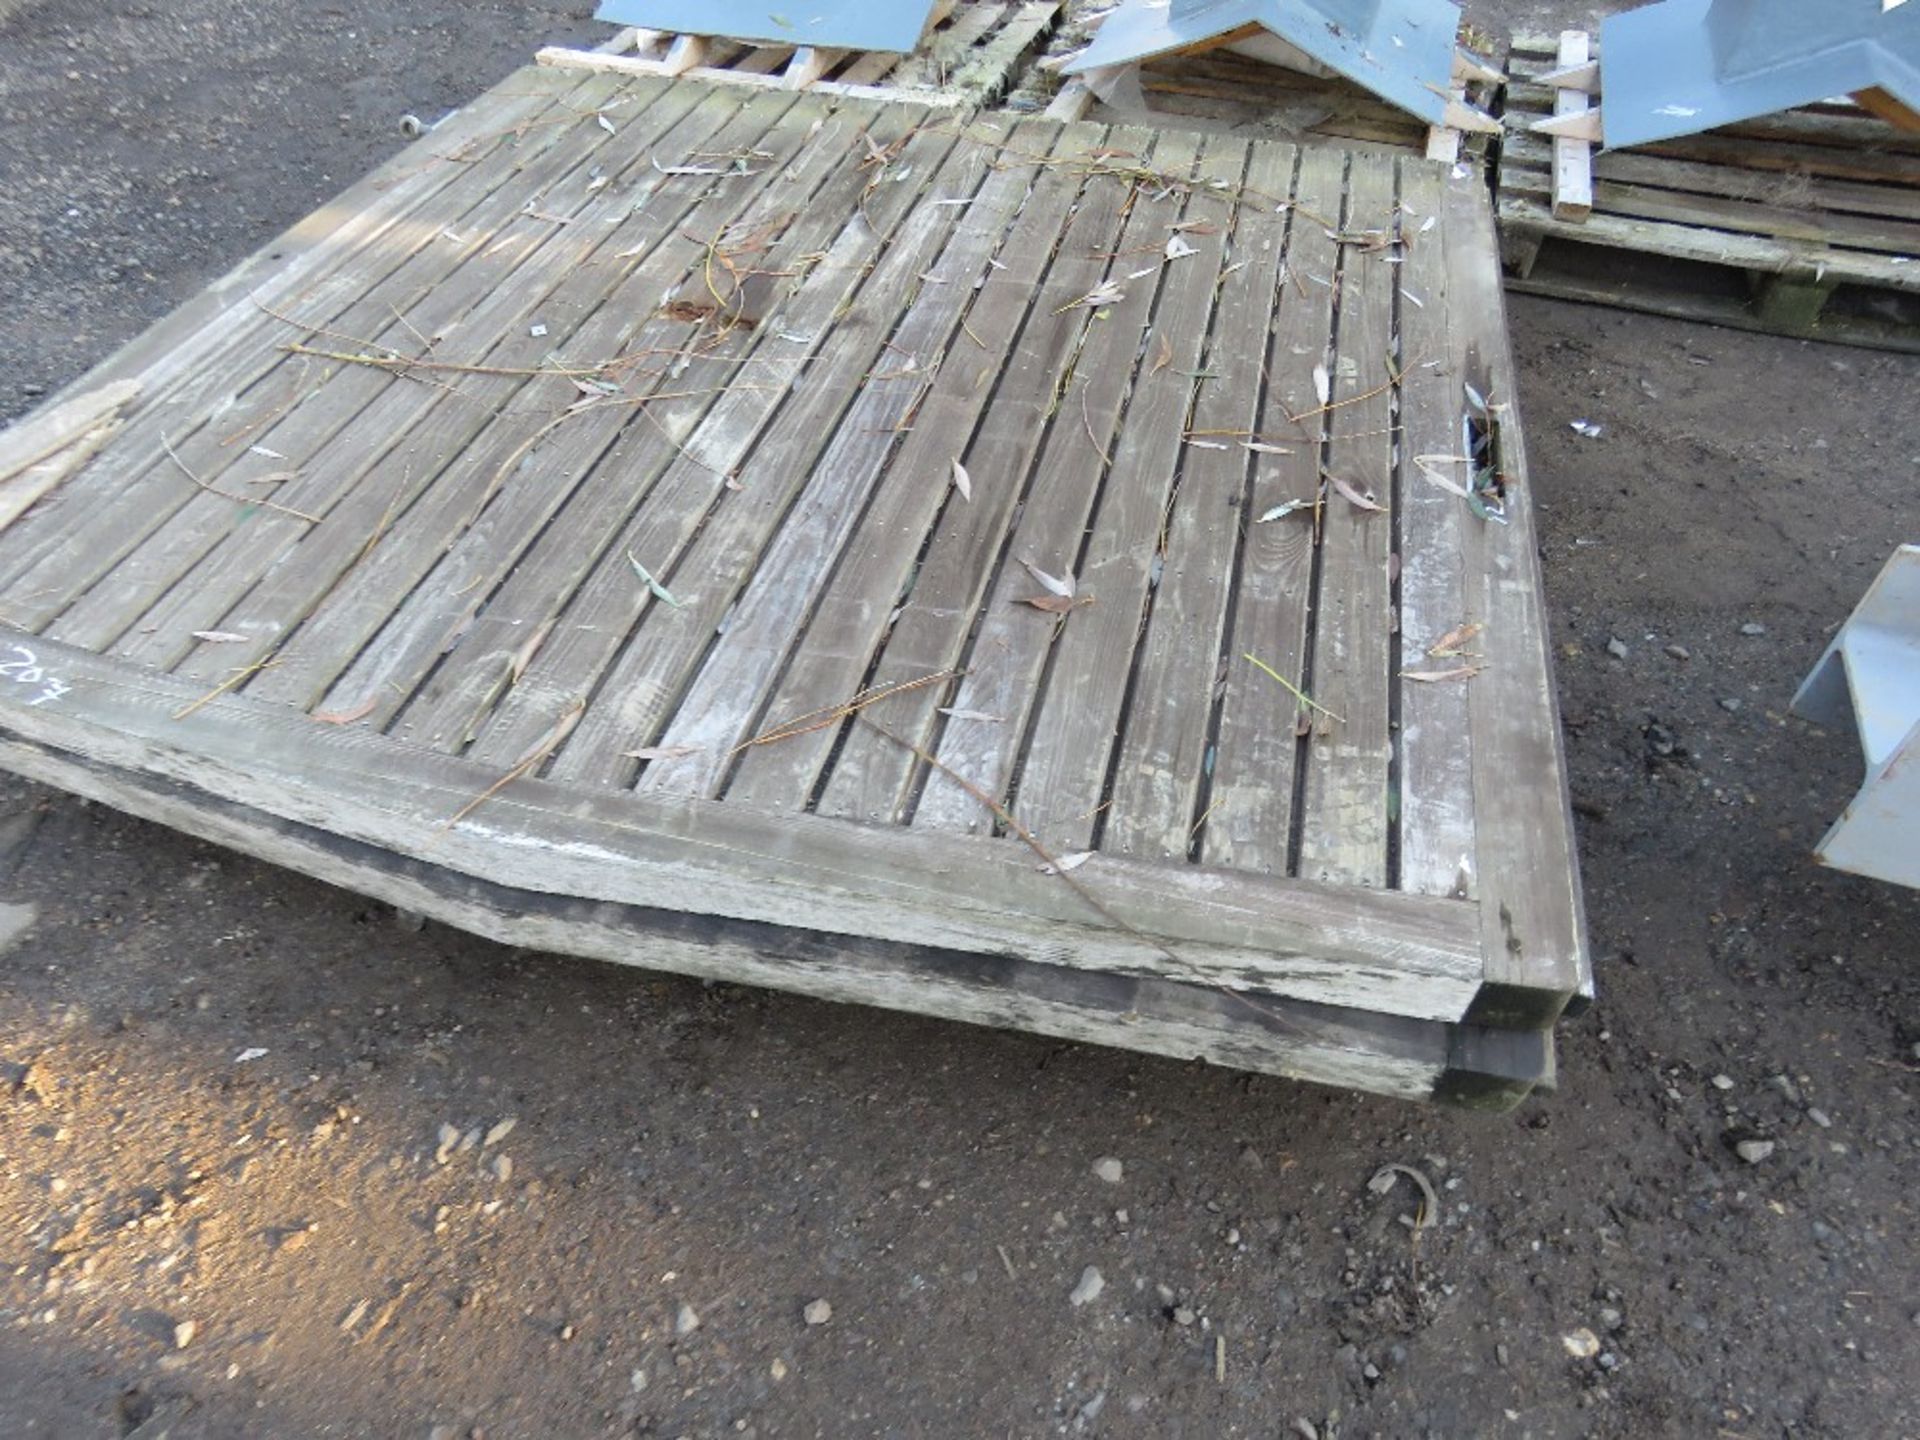 PAIR OF PRE-USED HEAVY DUTY WOODEN ENTRANCE GATES. 1.9M HEIGHT X 2.1M WIDTH EACH.